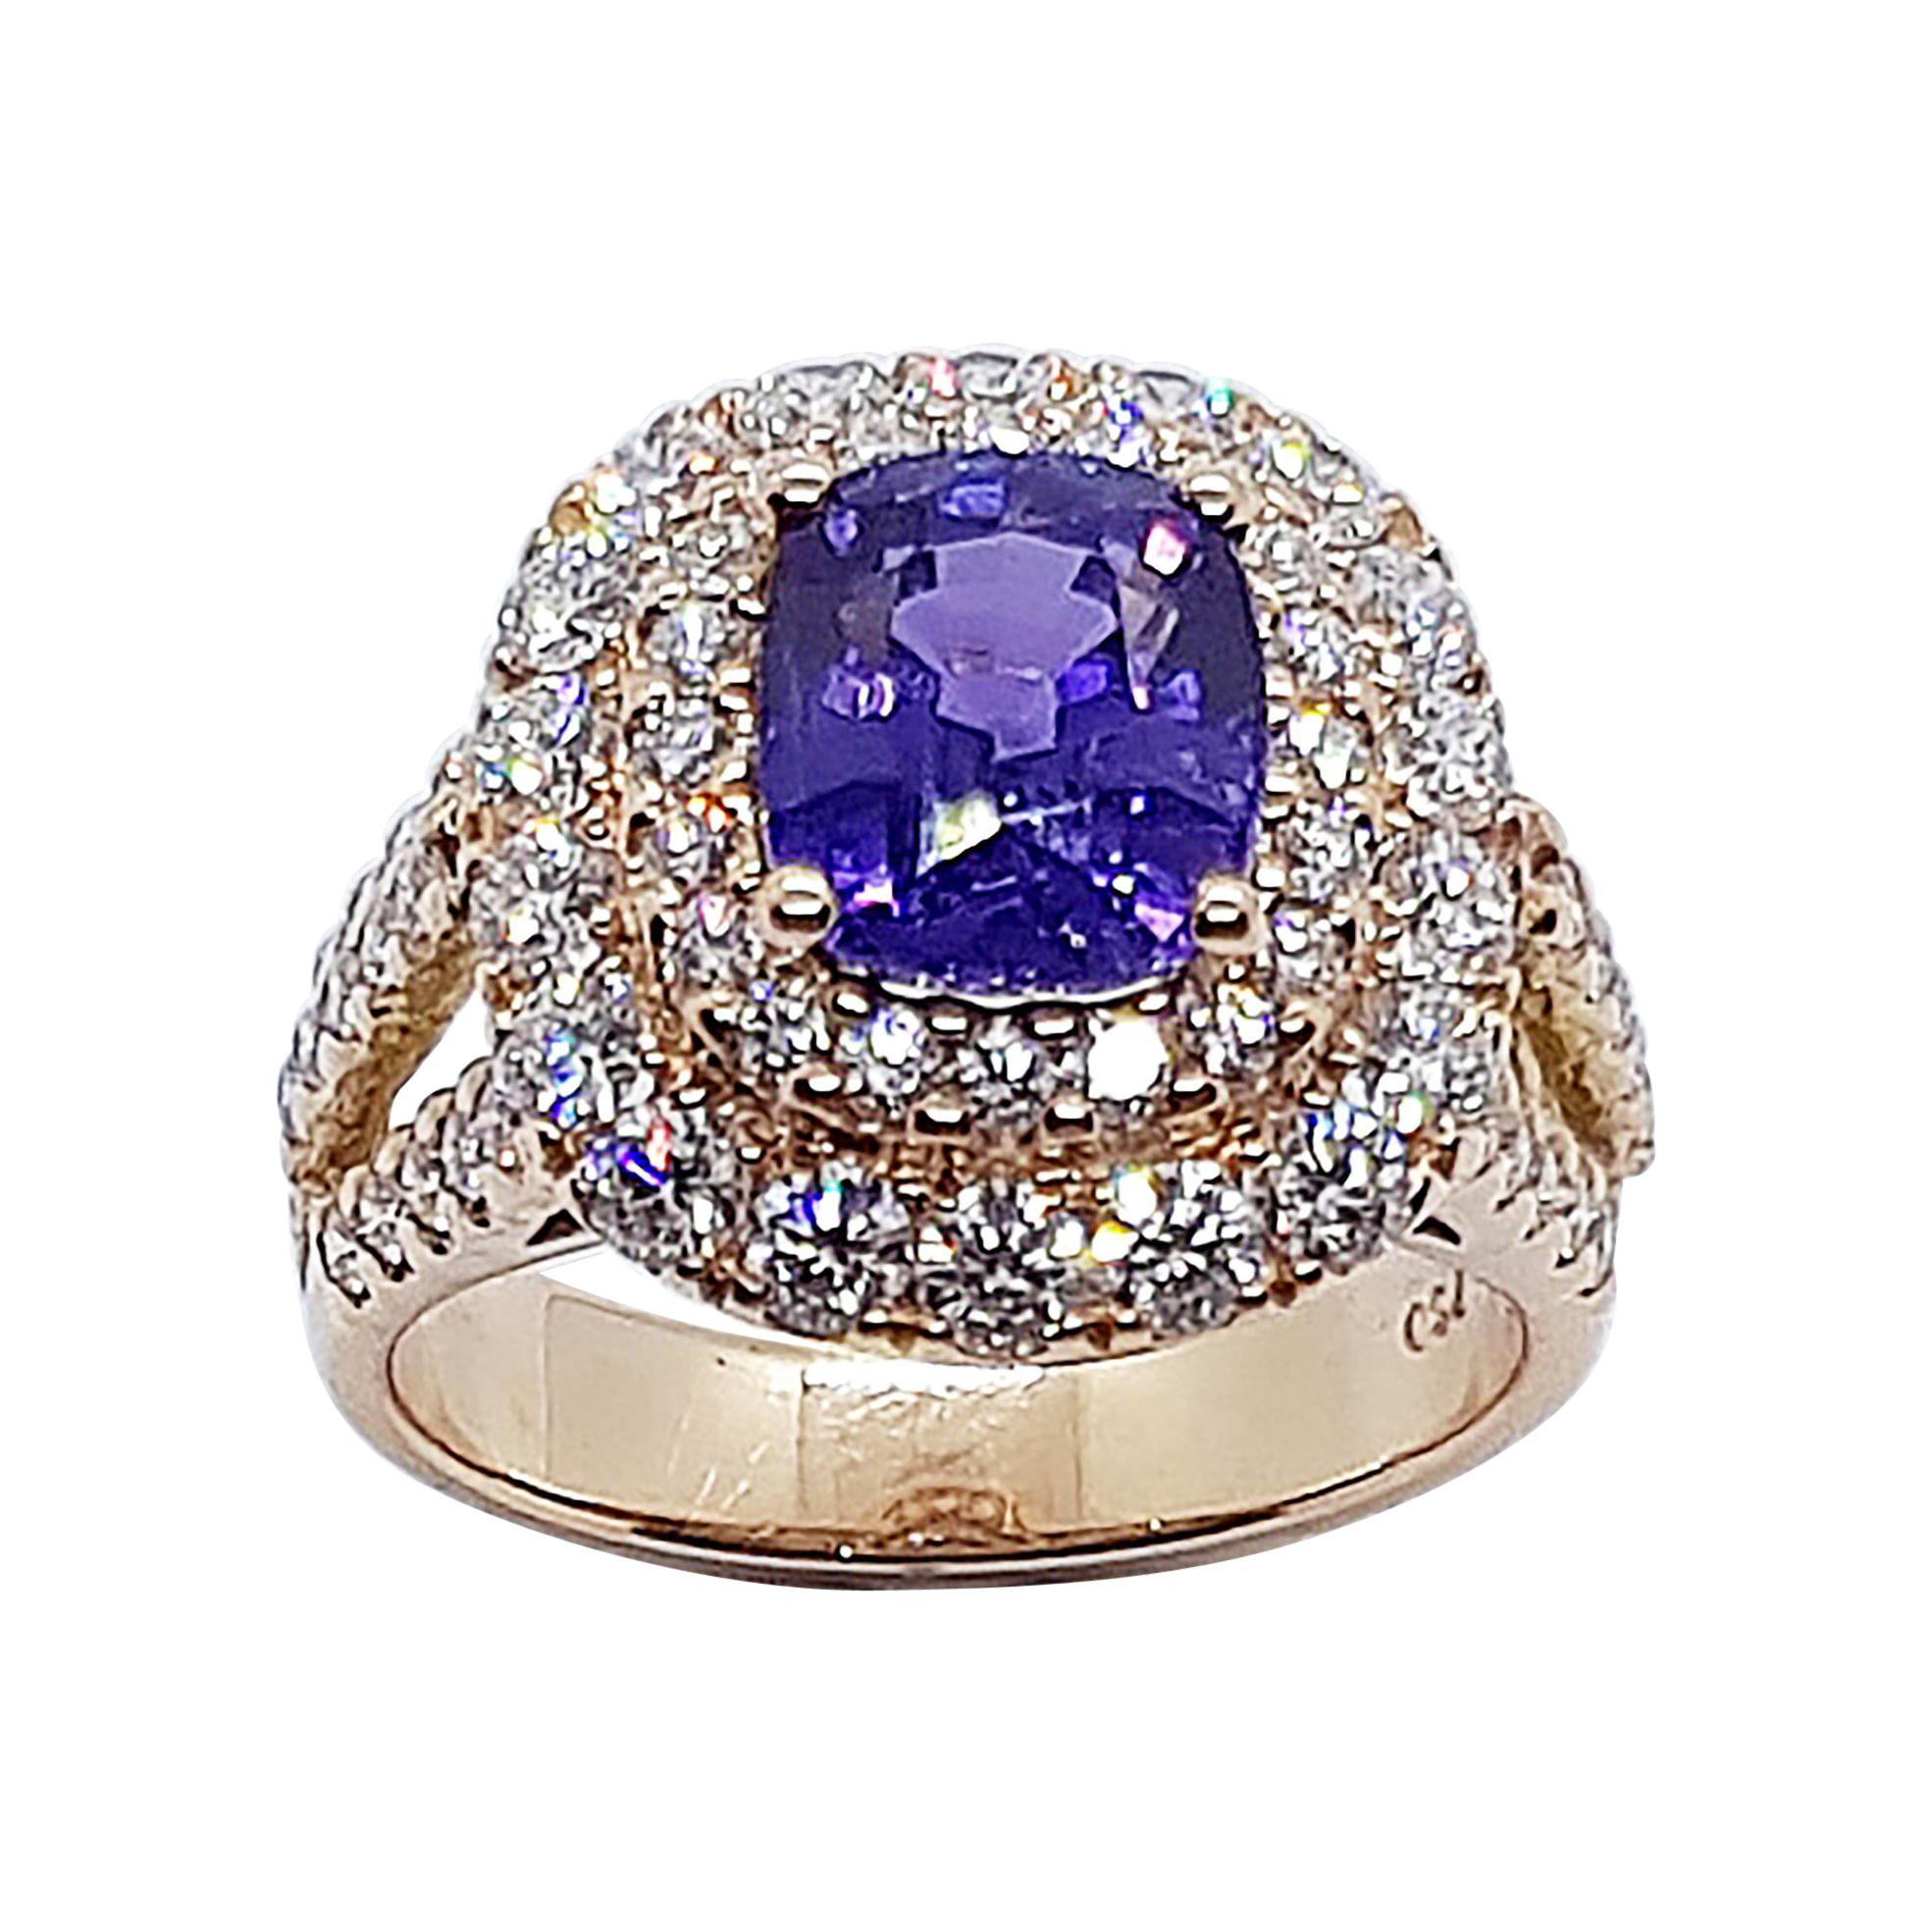 Certified Unheated 3 Cts Purple Sapphire with Diamond Ring Set in 18k Rose Gold